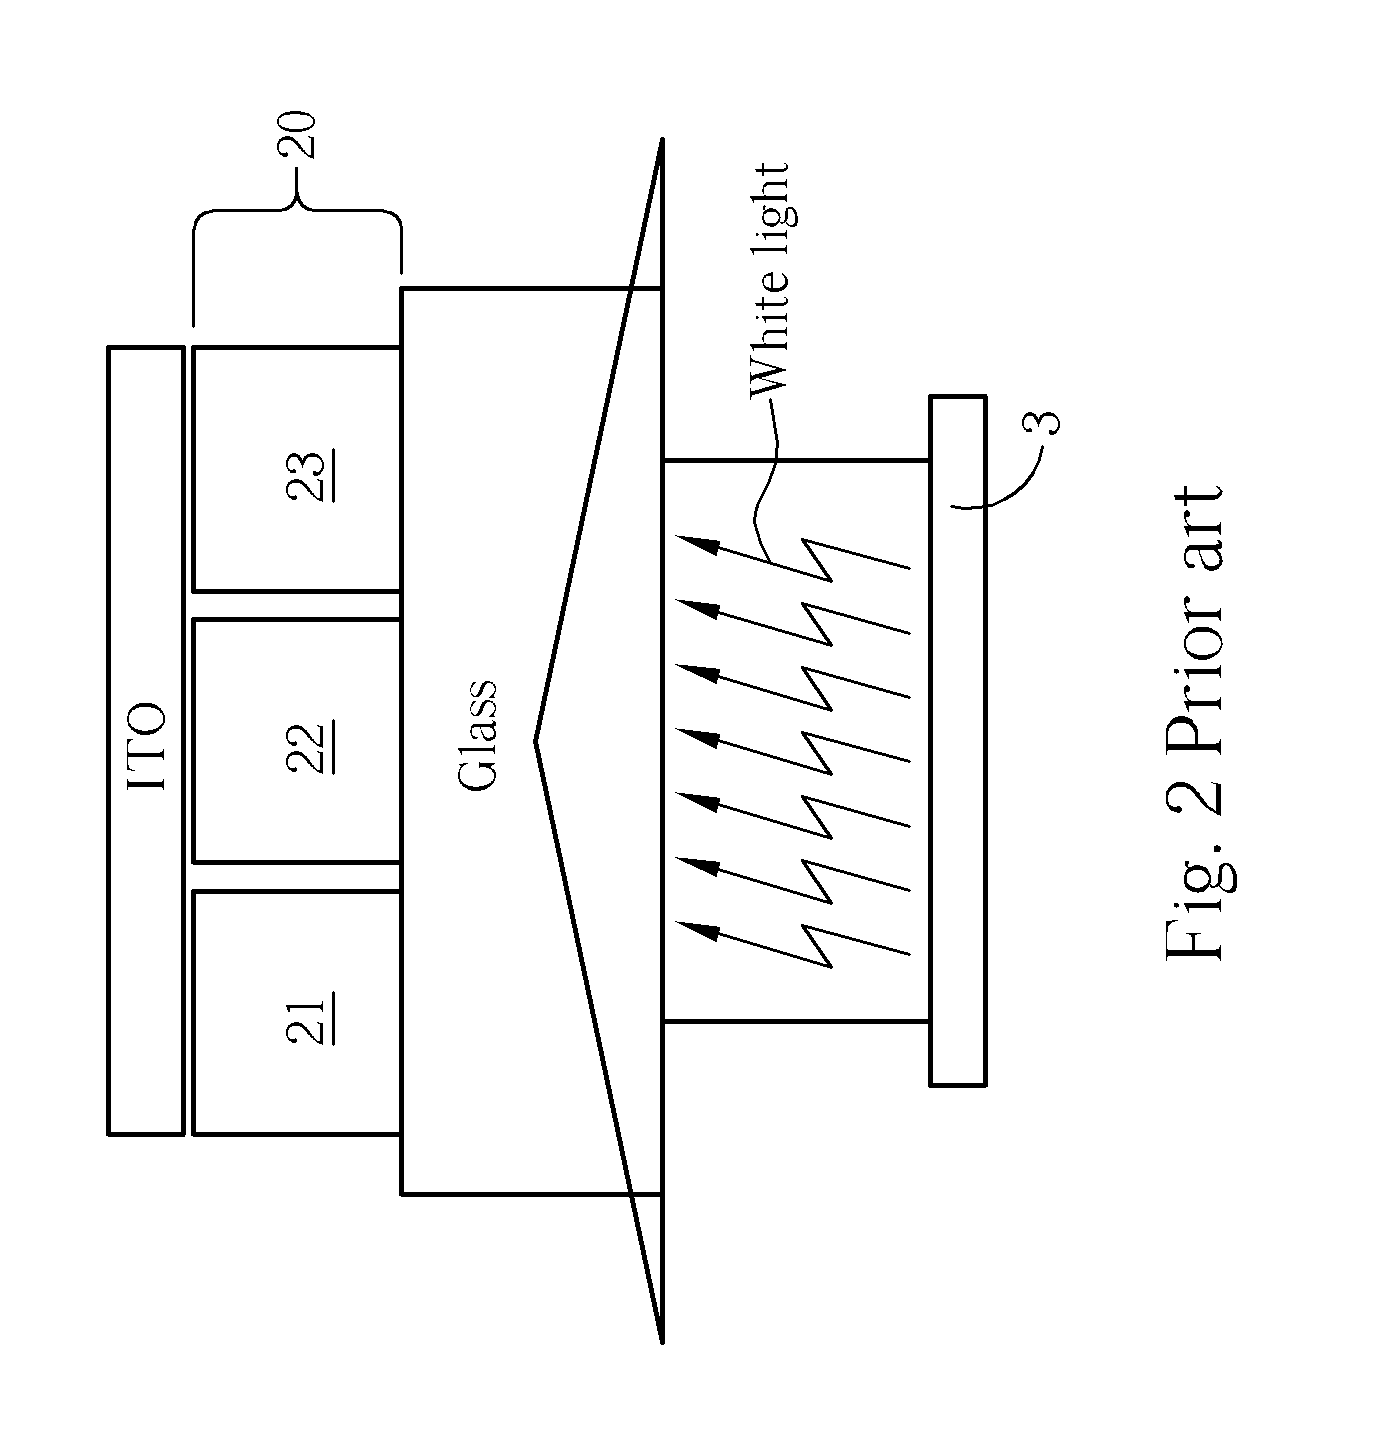 Liquid crystal display, method for displaying color images, and method for controlling light sources of an LCD panel